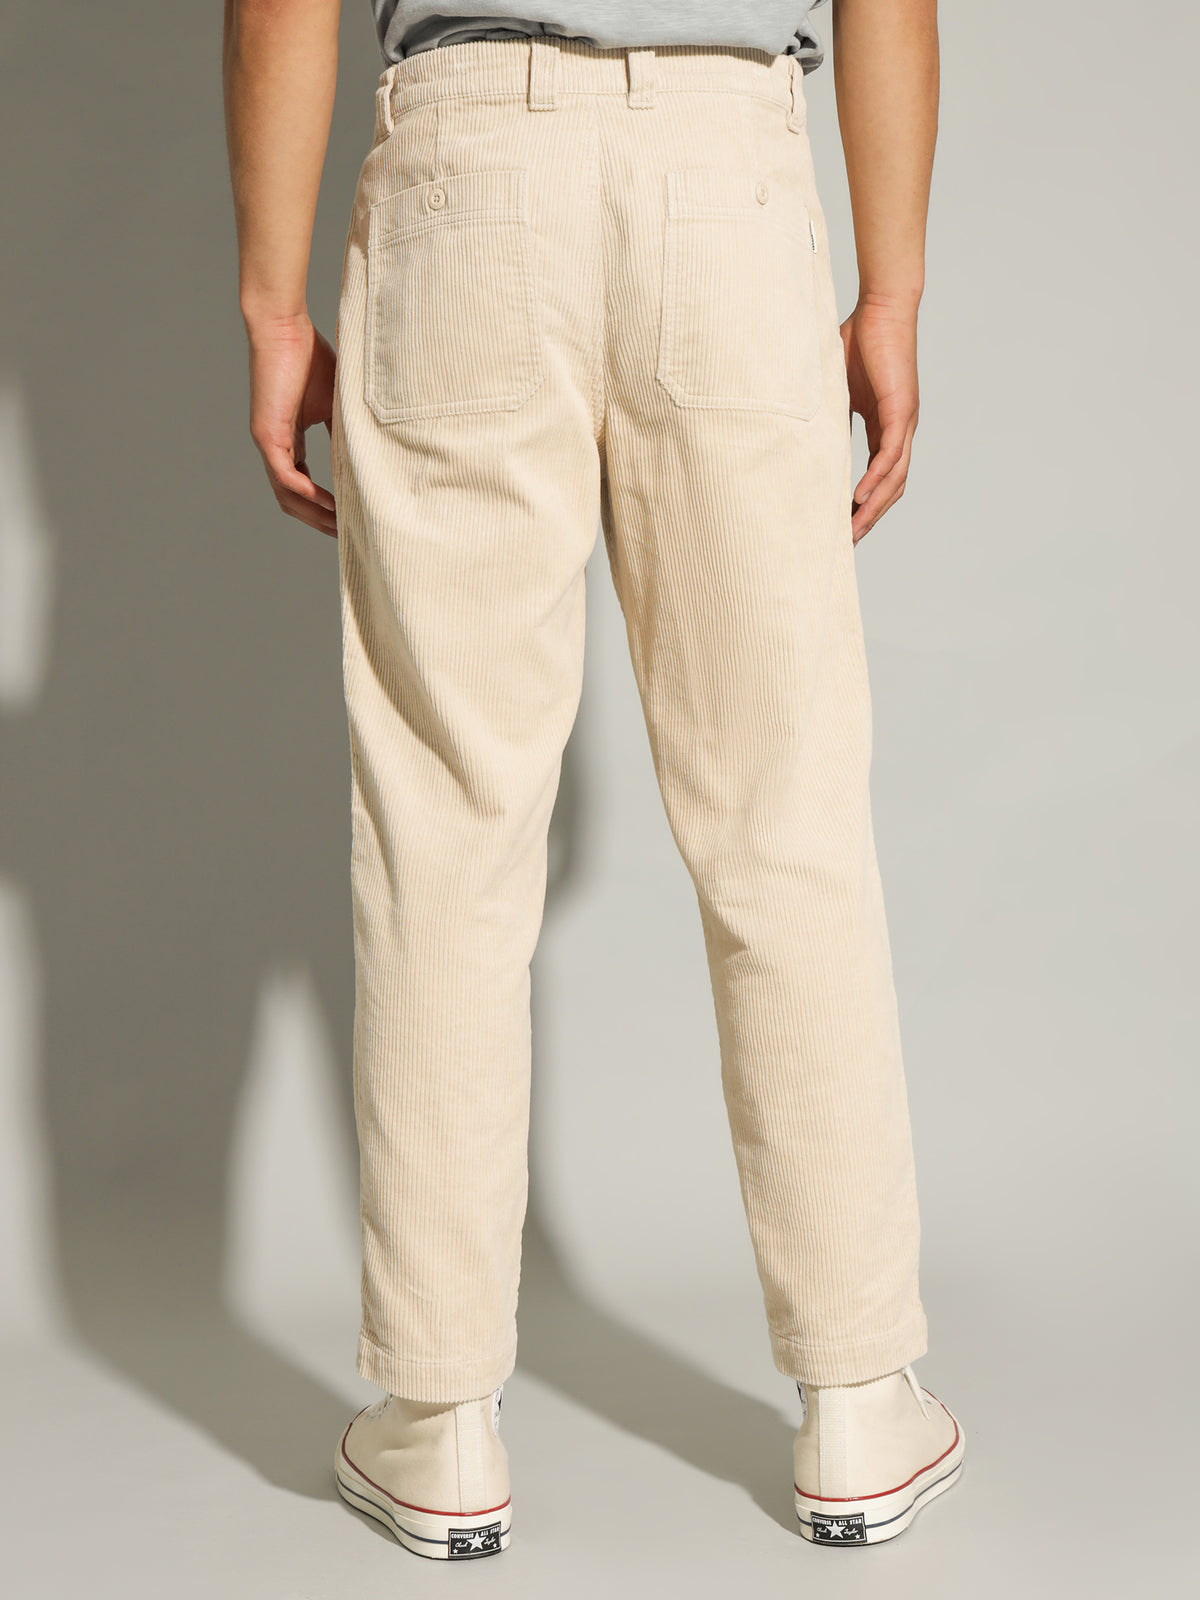 Oakes Cord Pant in Stone